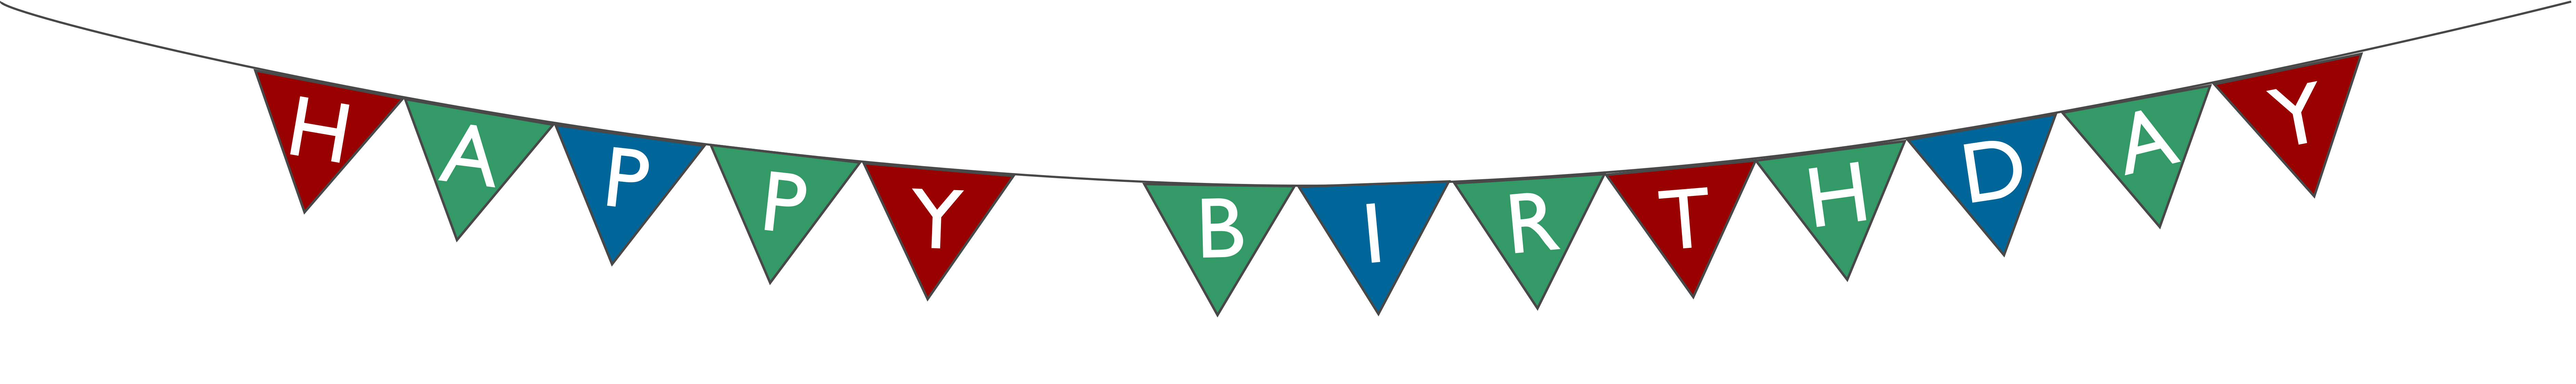 File:Birthday banner for 4th 